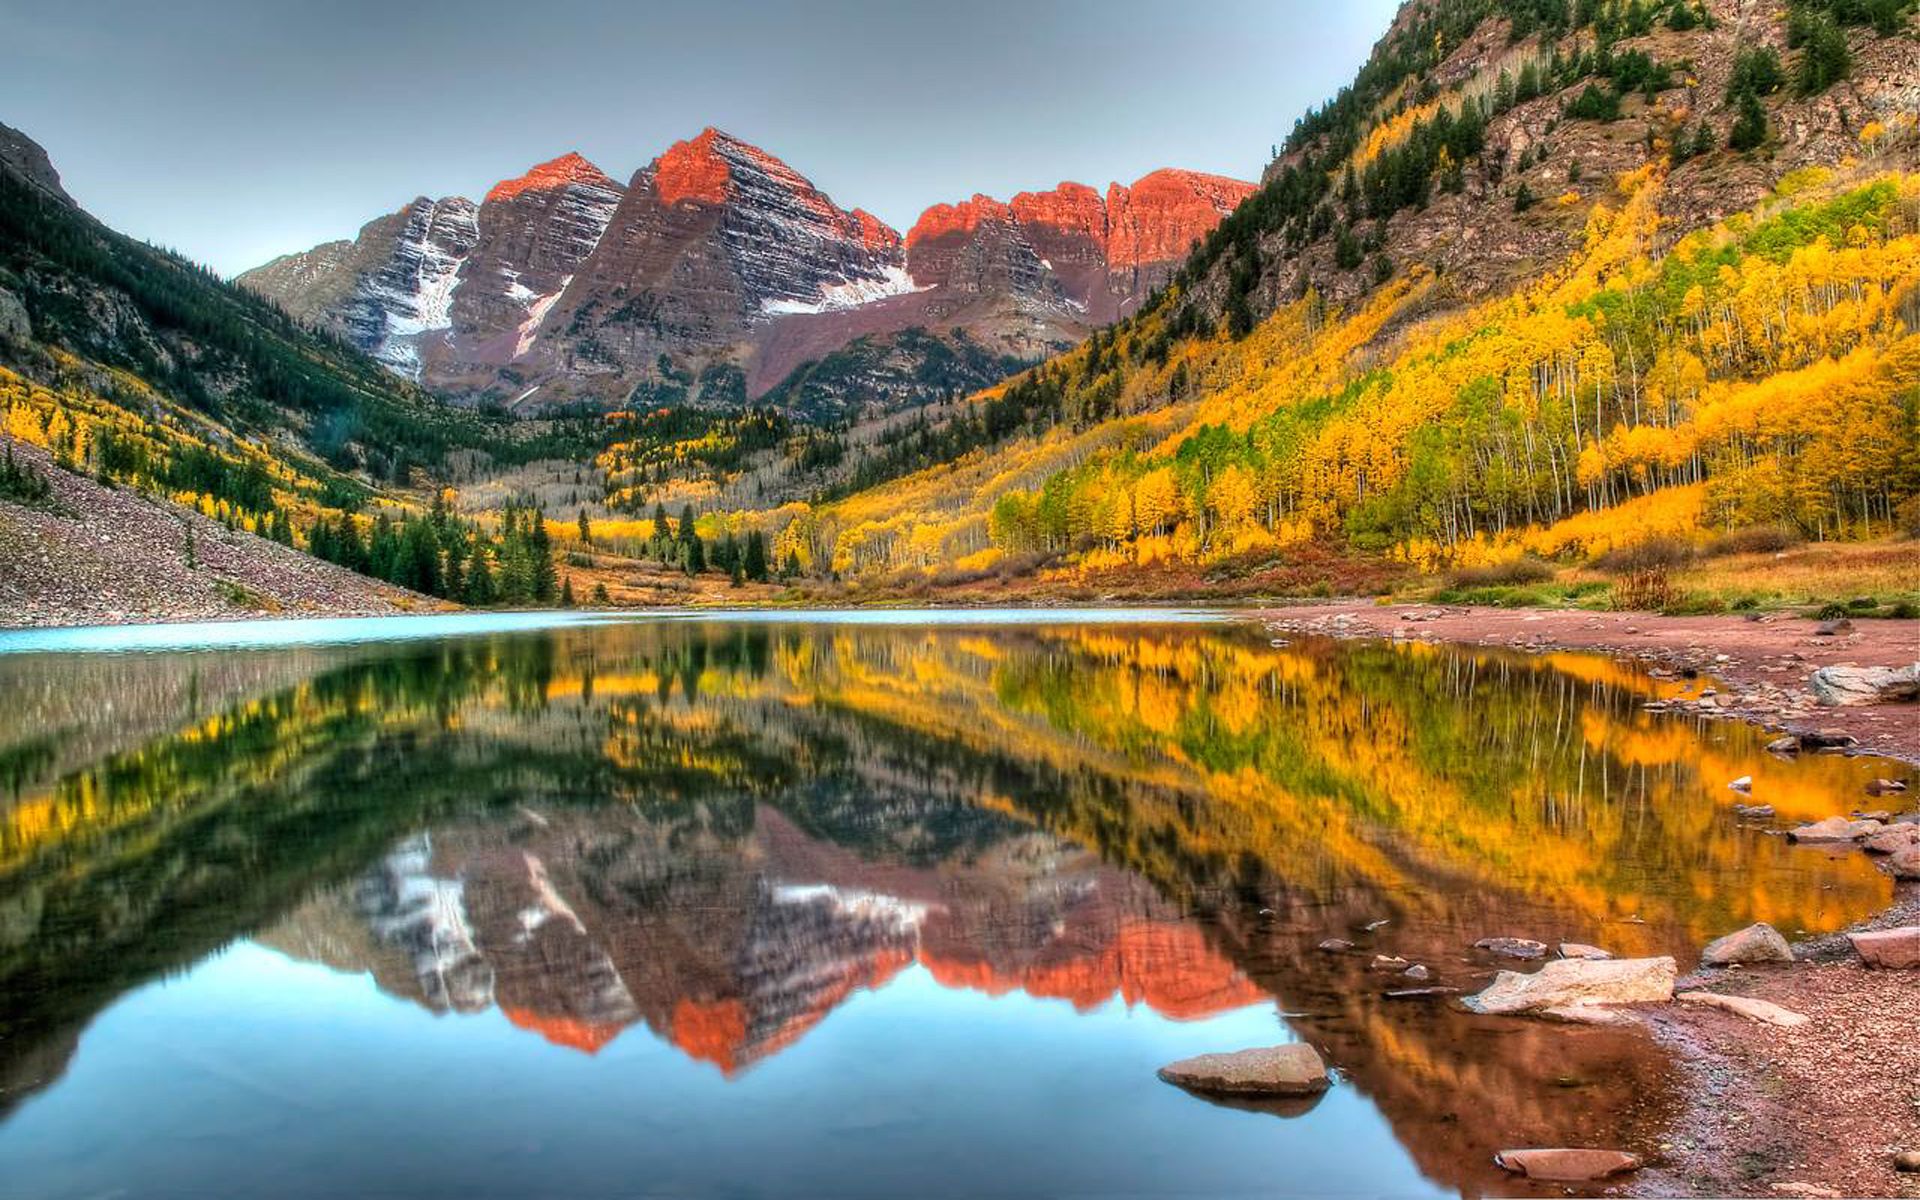 Maroon Bells Mountain Peak Two Peaks In The Elk Mountains Maroon Peak And North Maroon Peak Gunnison County Colorado United States Wallpaper HD 1920x1200, Wallpaper13.com